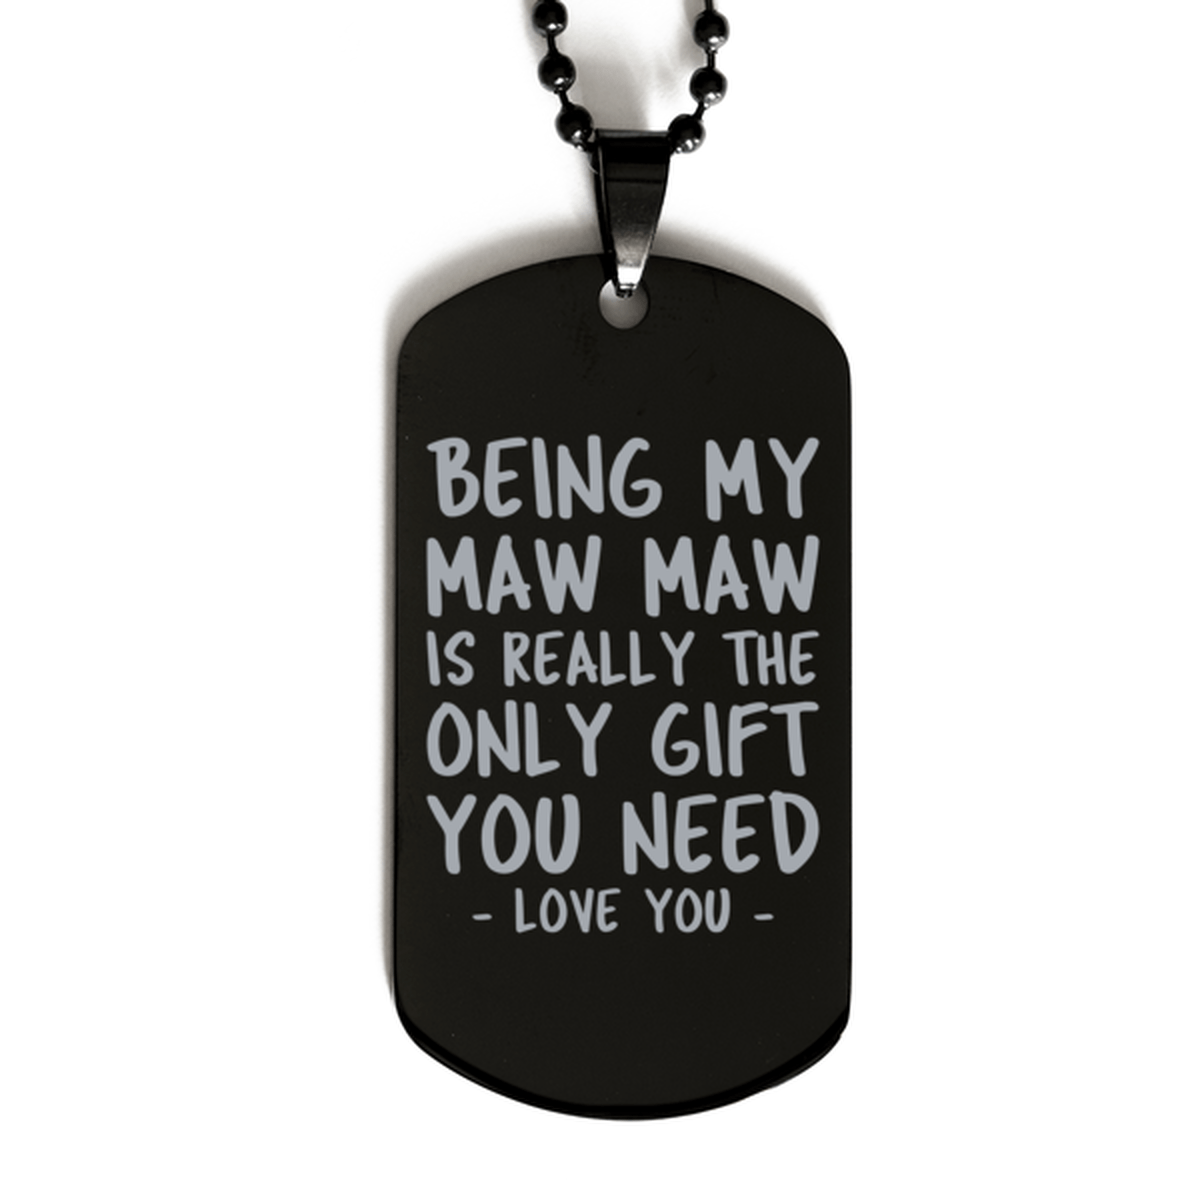 Funny Maw Maw Black Dog Tag Necklace, Being My Maw Maw Is Really the Only Gift You Need, Best Birthday Gifts for Maw Maw